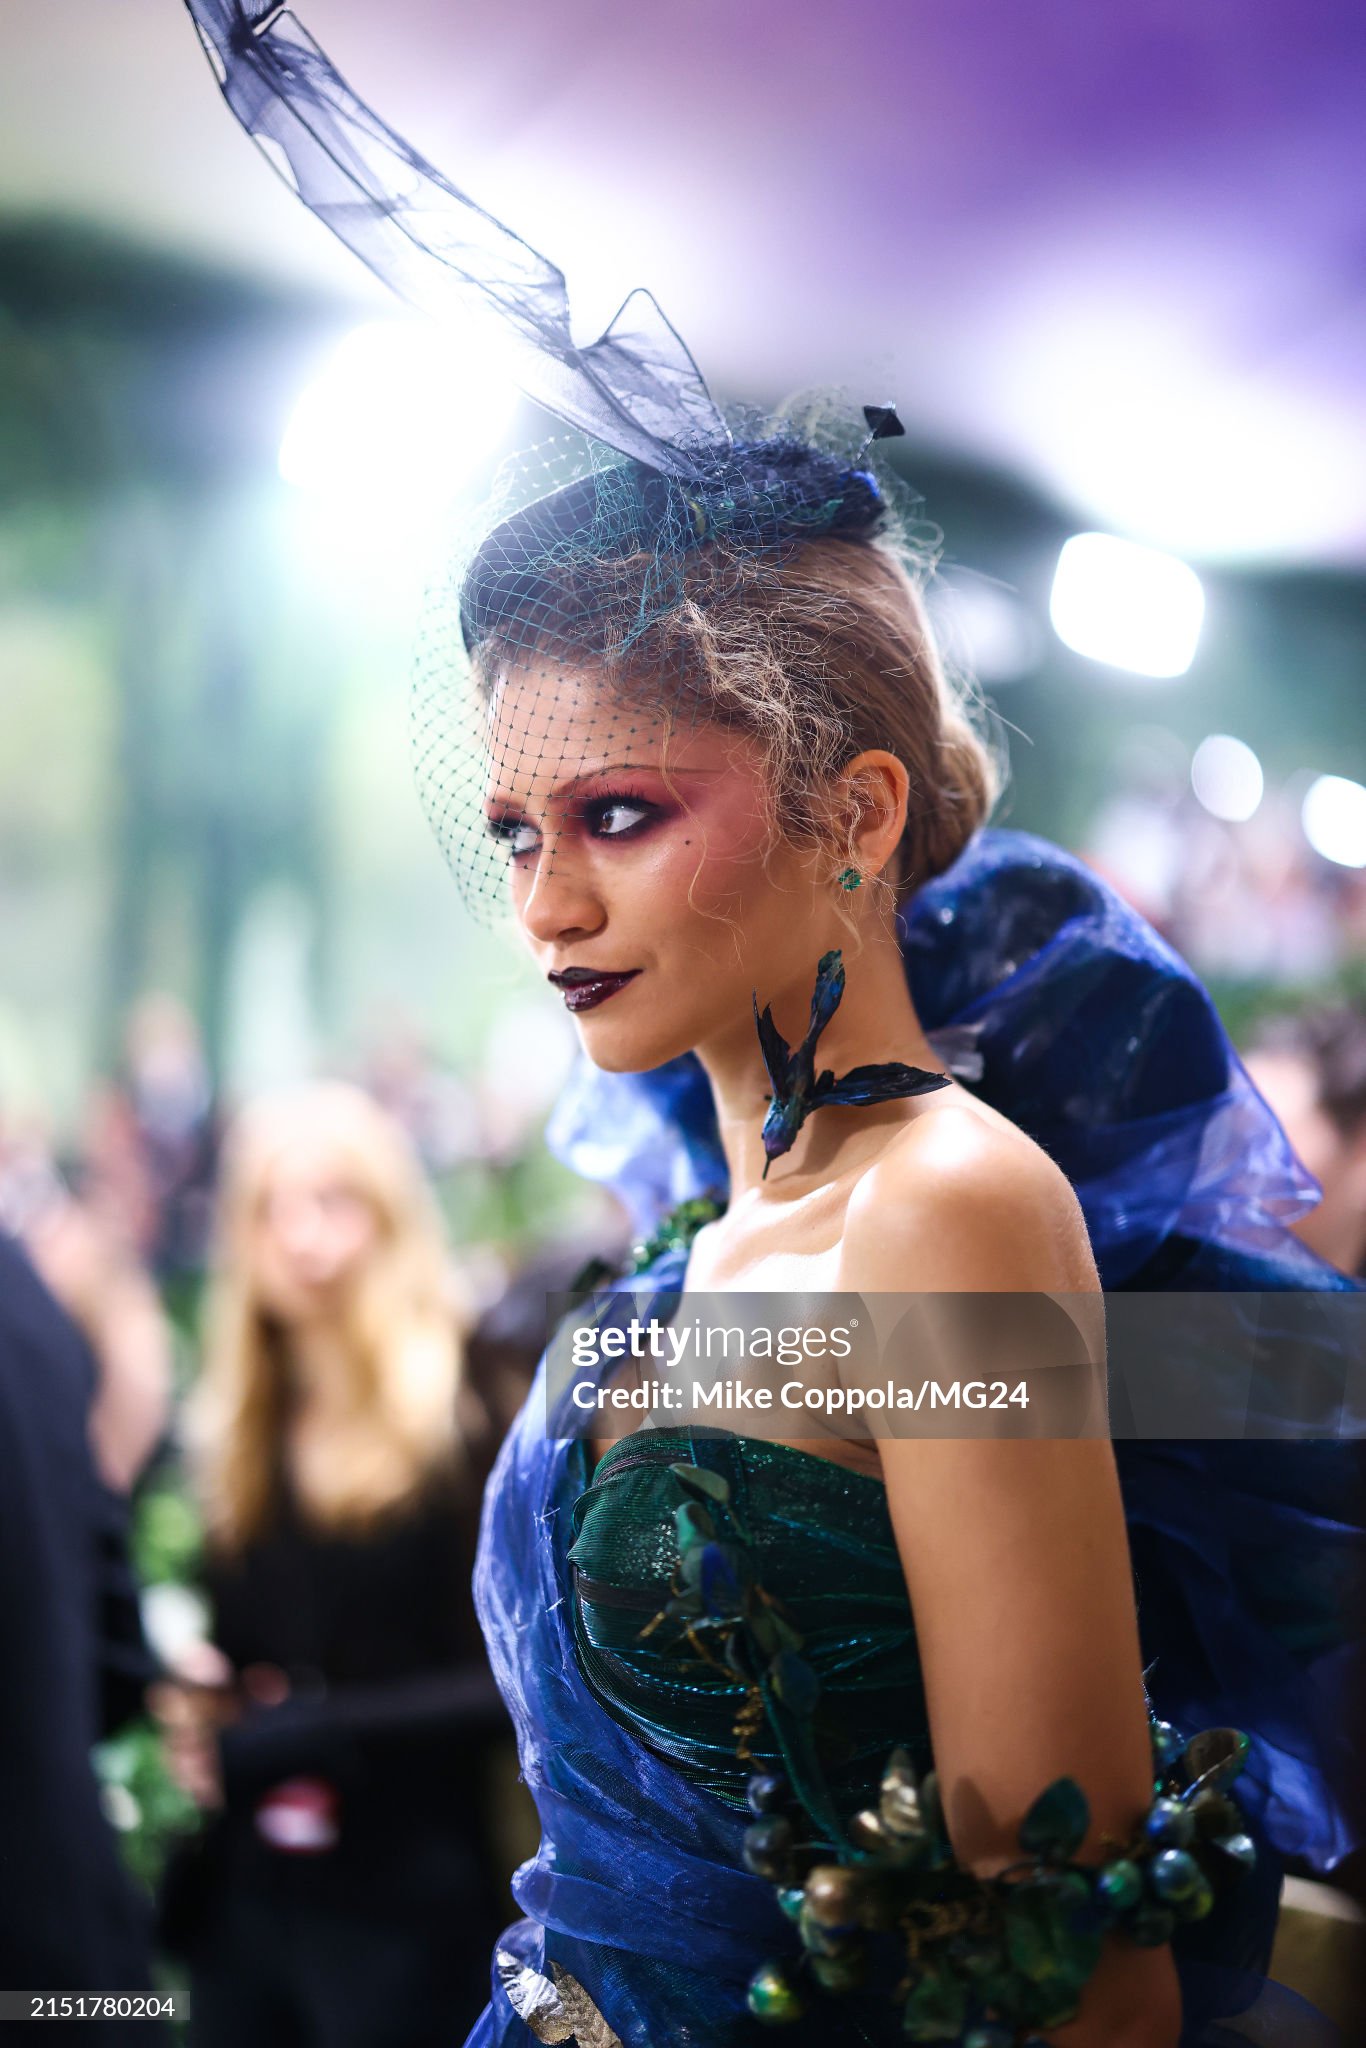 gettyimages-2151780204-2048x2048.jpg